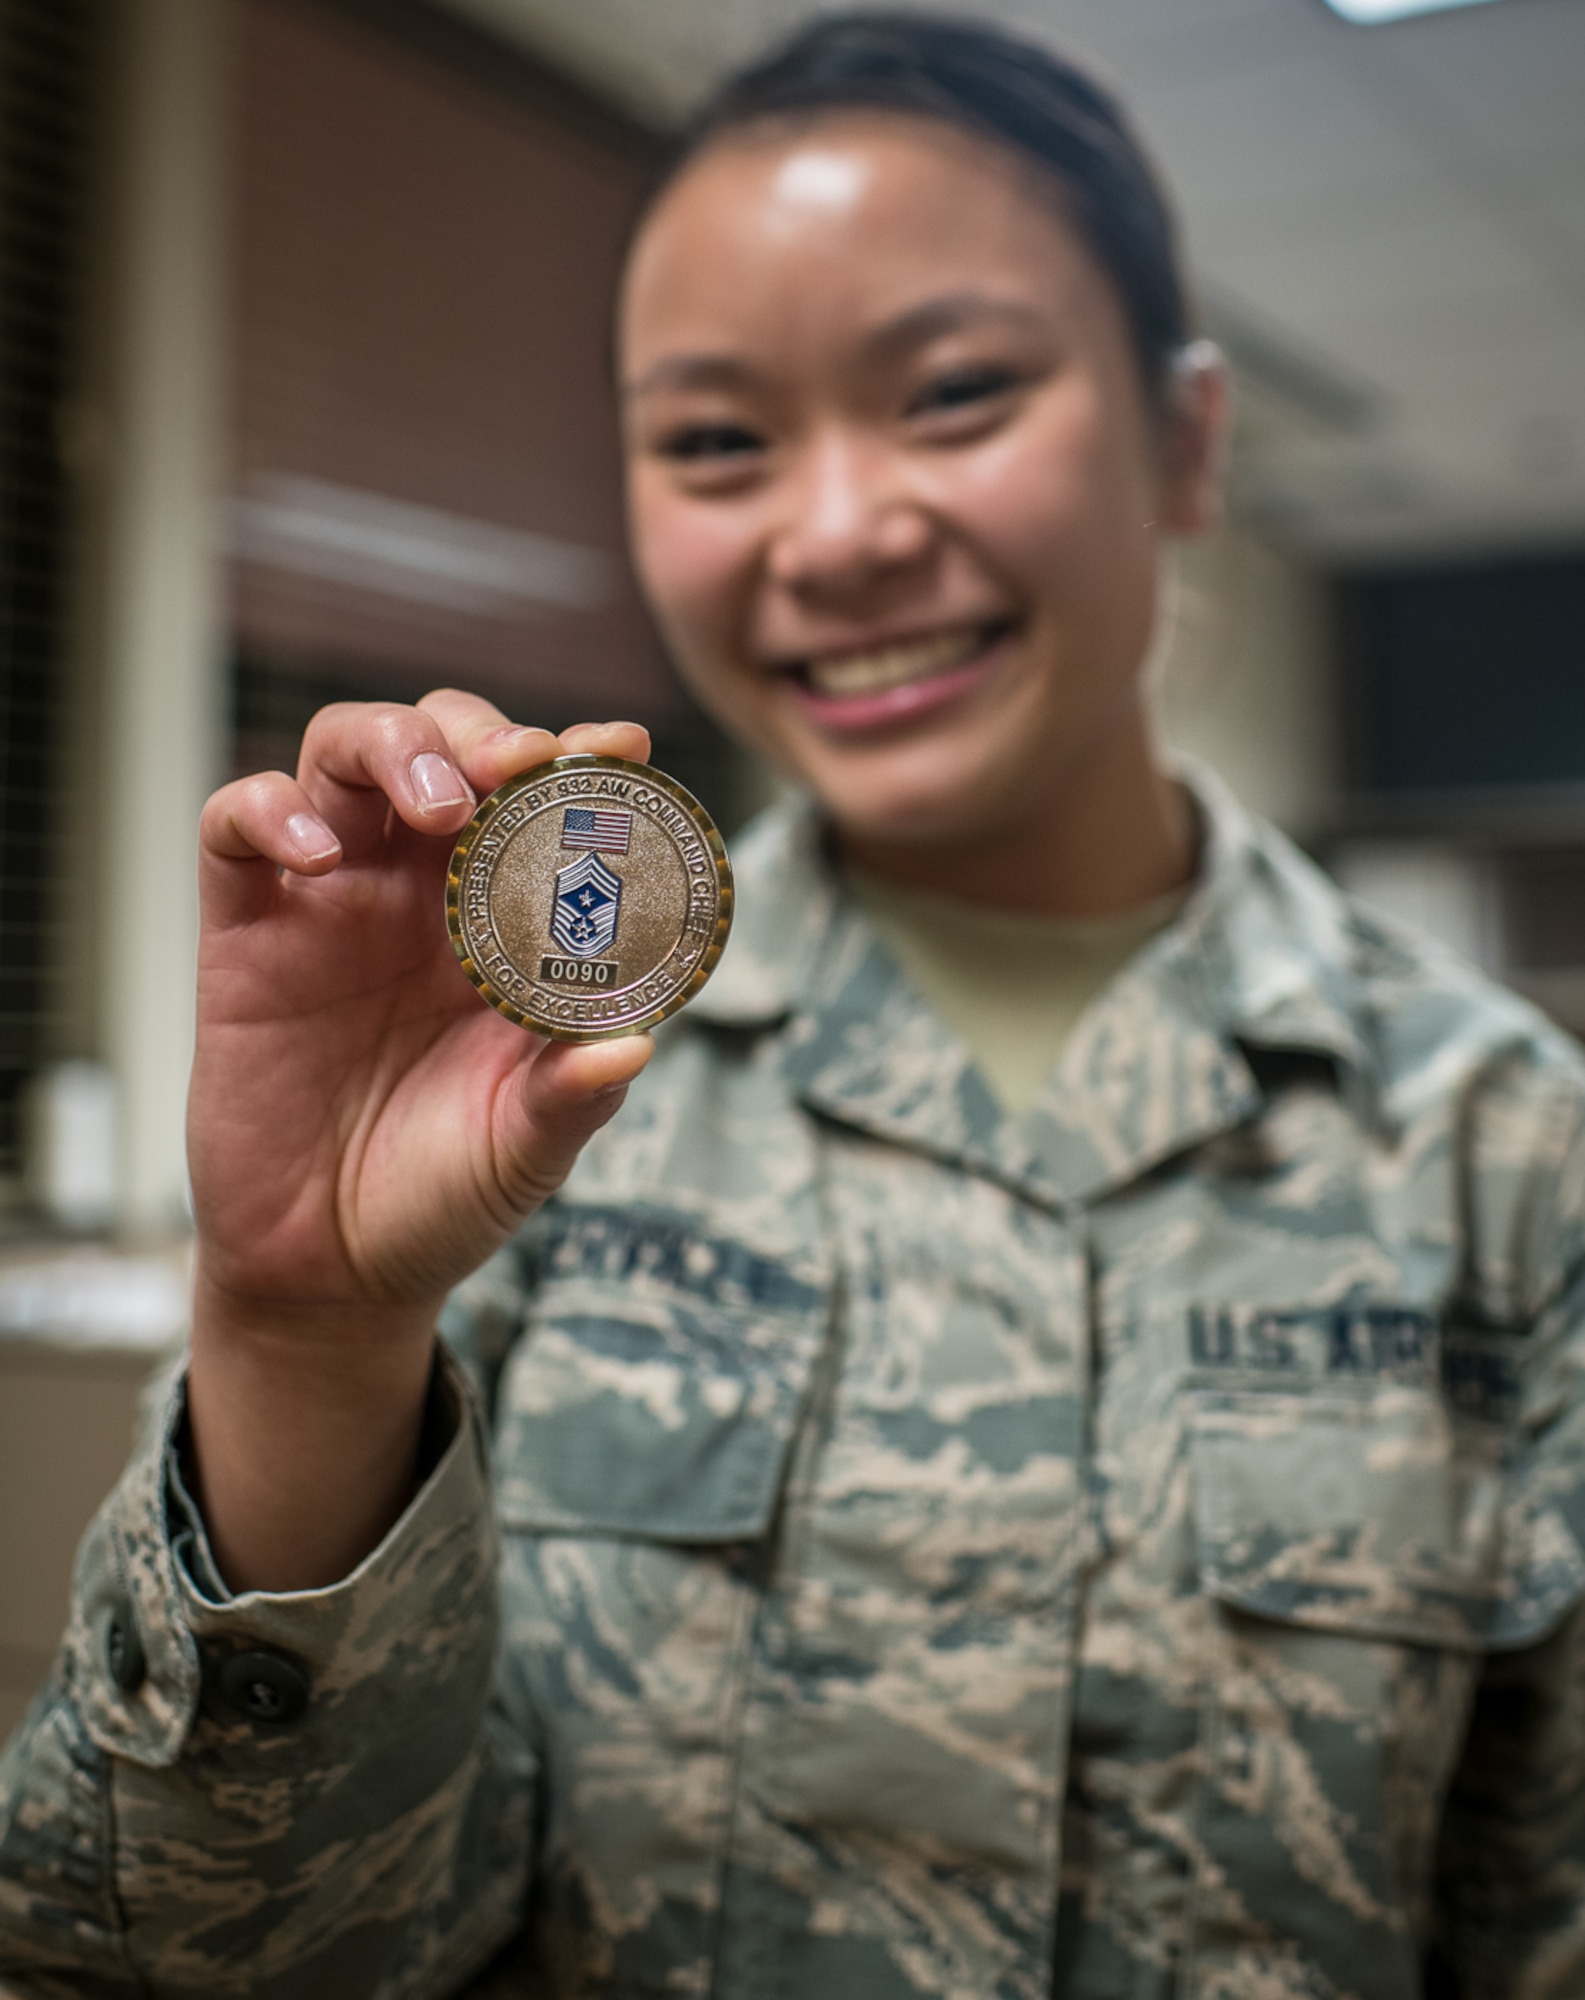 U.S. Air Force Citizen Airman, Senior Airman Kathryn N. Baskerville, 932nd Force Support Squadron, customer support technician  receives a Wing coin from 932nd Airlift Wing Command Chief, Barbara Gilmore for overall excellence in service and Baskervilles's recent graduation from Airmen Leadership School, Jan. 10, 2020, Scott Air Force Base, Illinois. (U.S. Air Force photo by Christopher Parr)